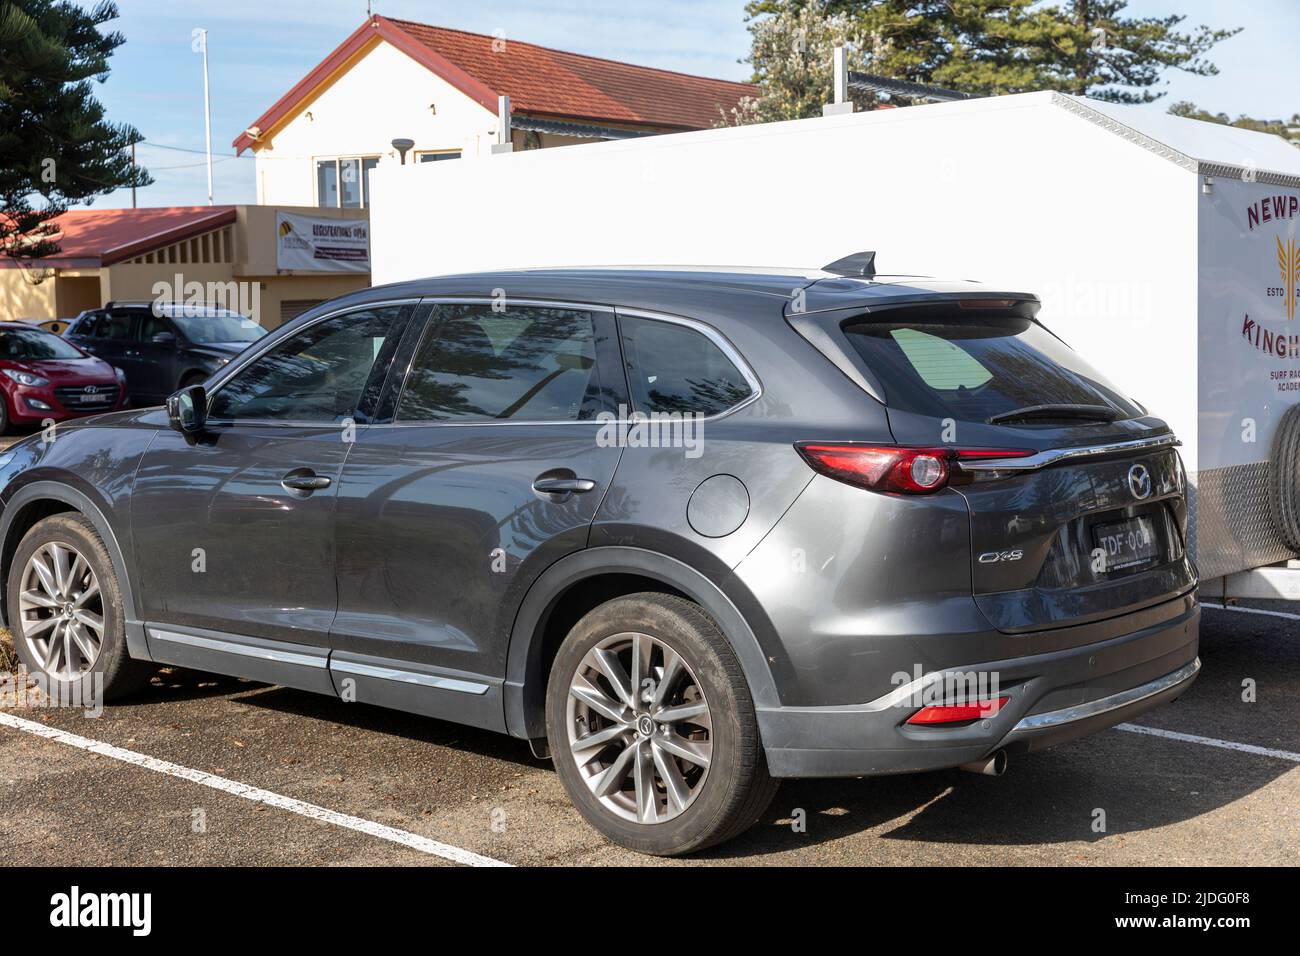 Mazda CX9 SUV vehicle parked at a Sydney beach car park, pictured is a 2016 model Mazda CX9 Stock Photo